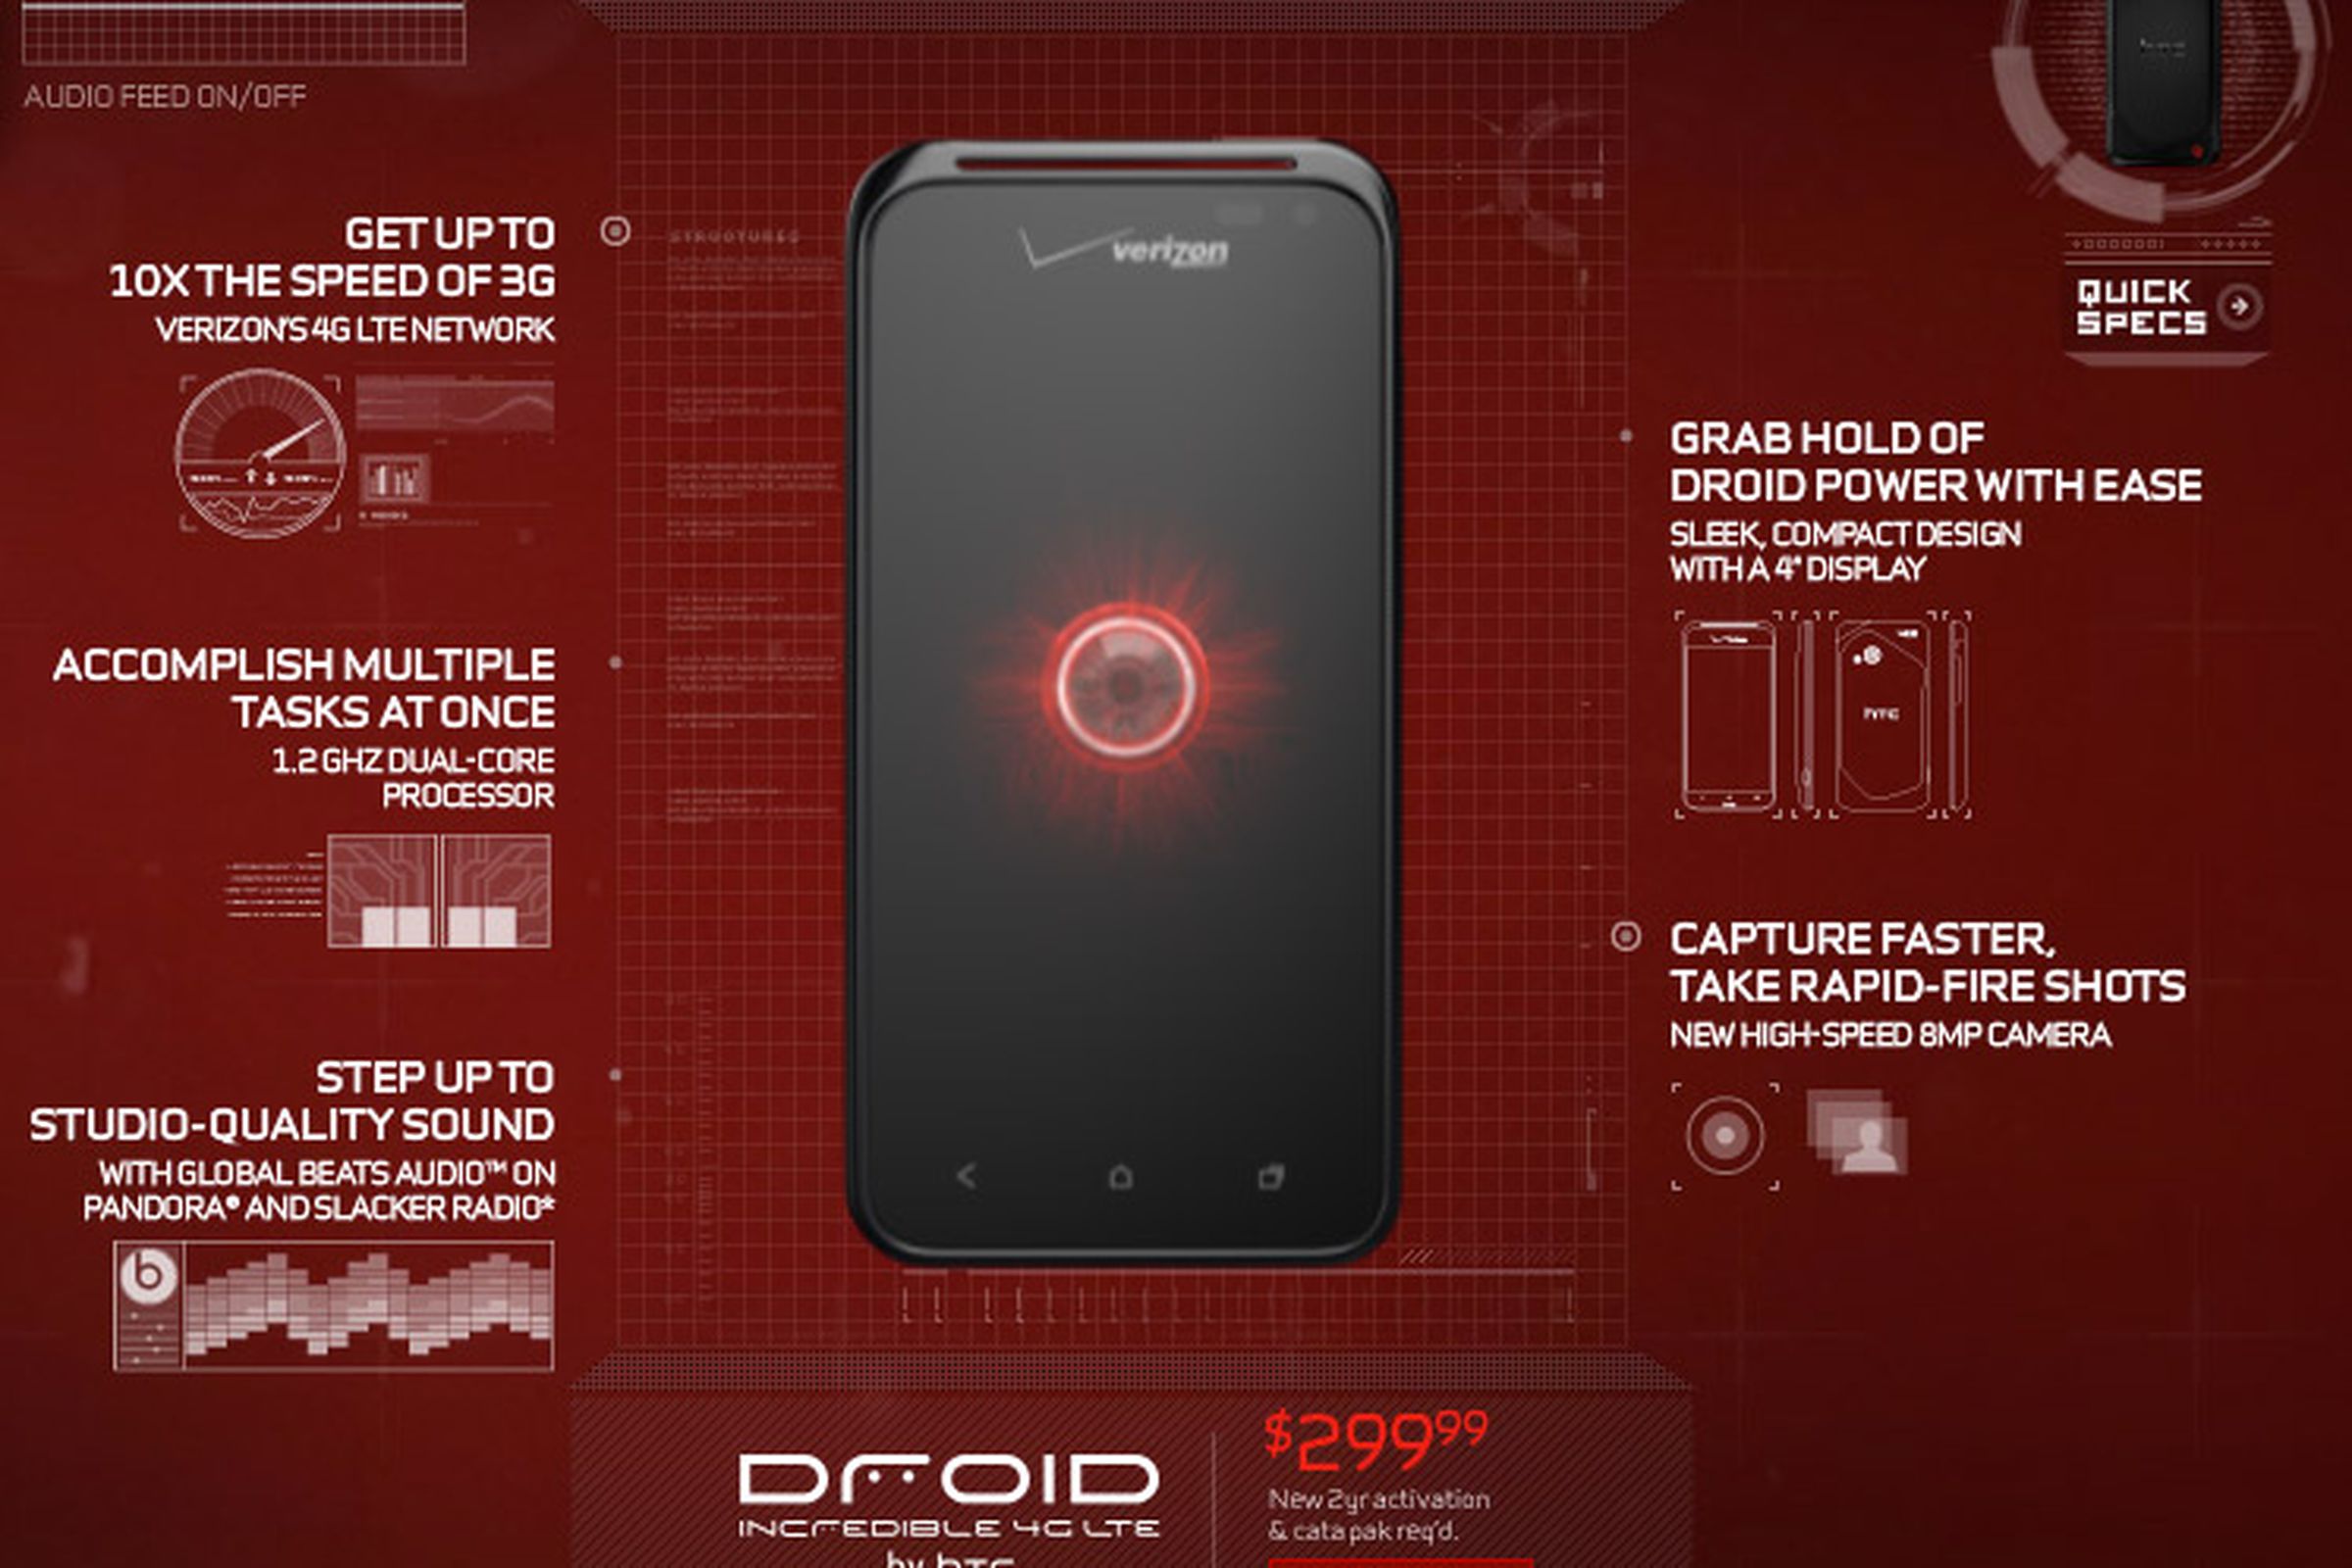 Droid Incredible 4G LTE teaser page